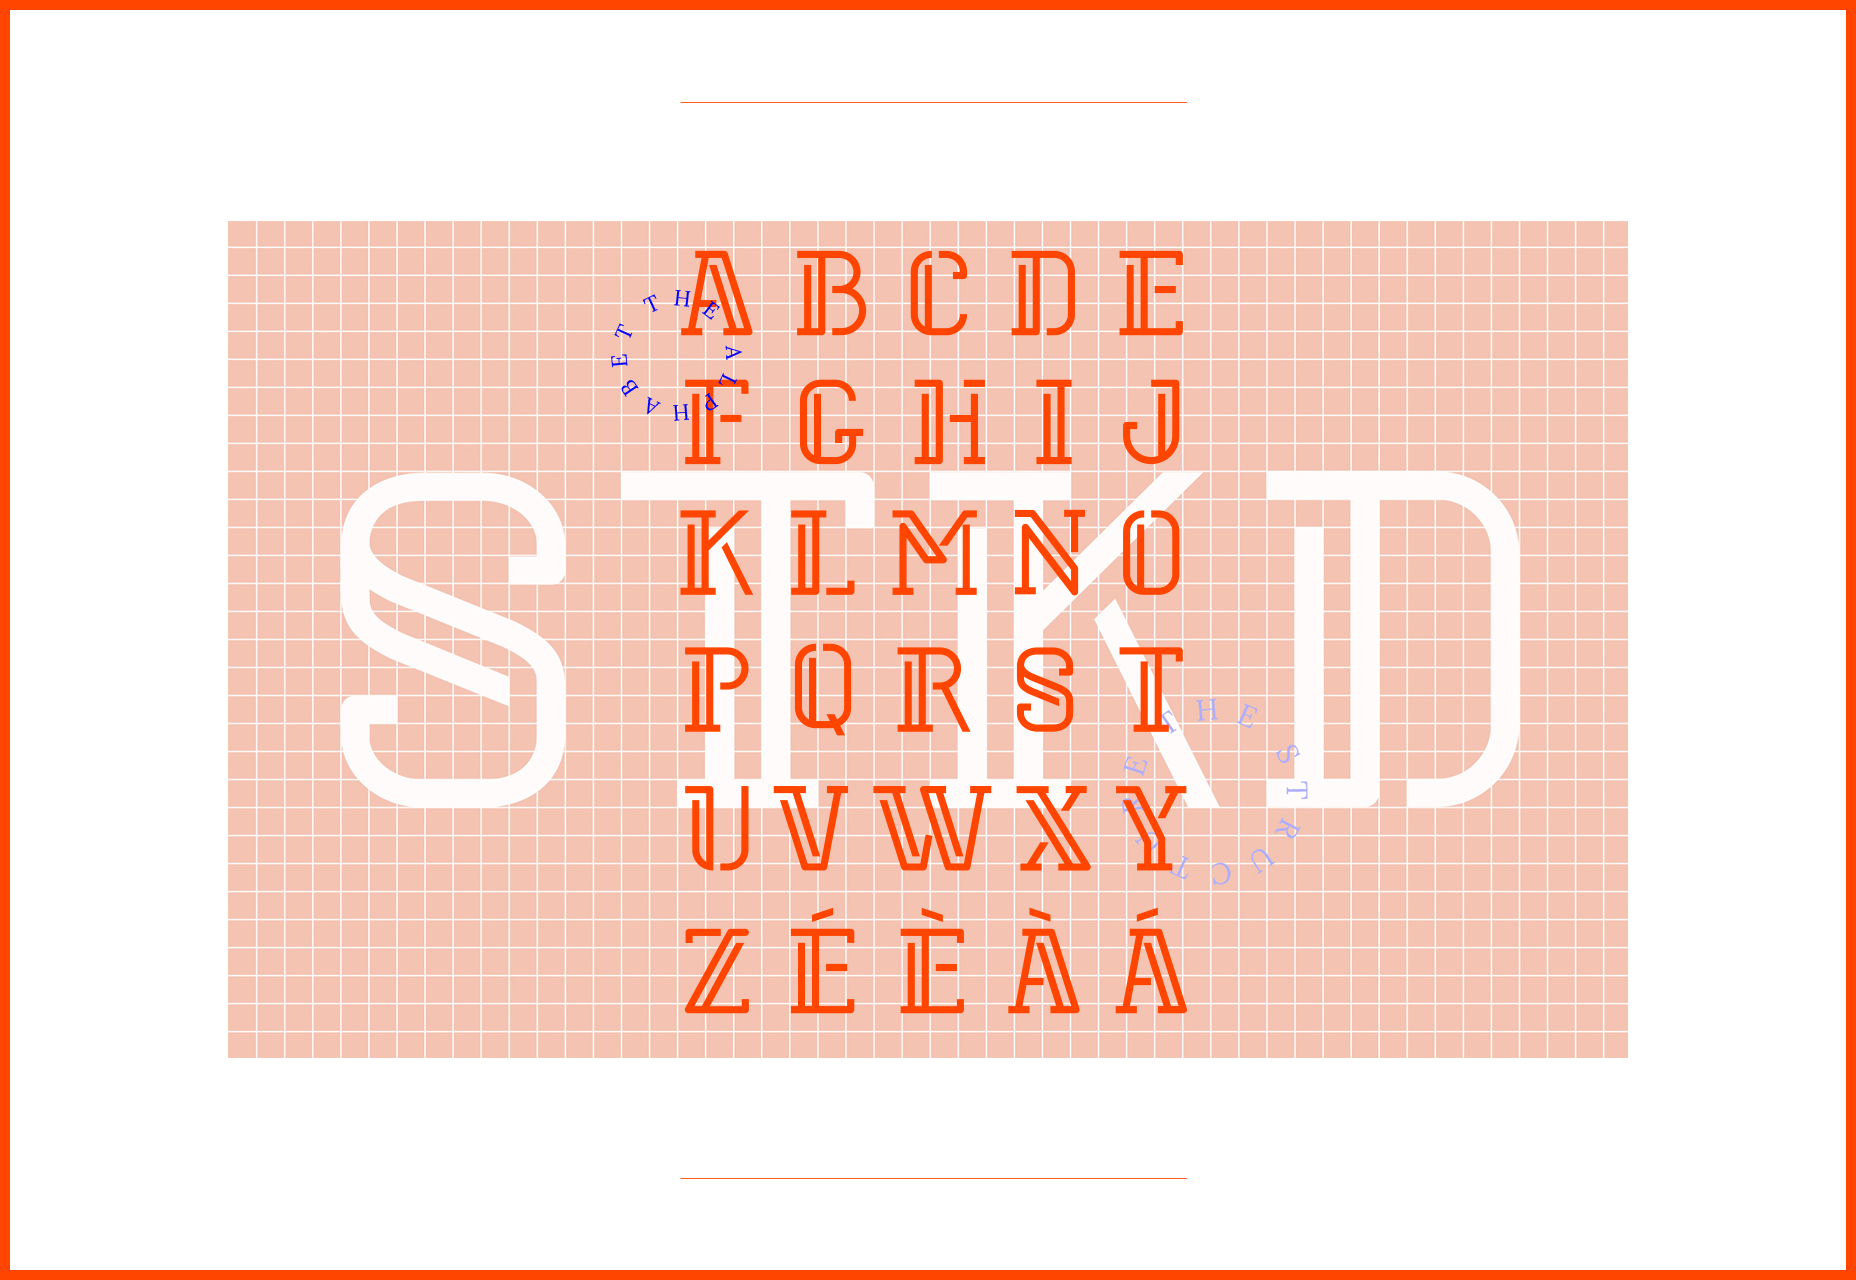 Stoked: Side Offset Featured Typeface